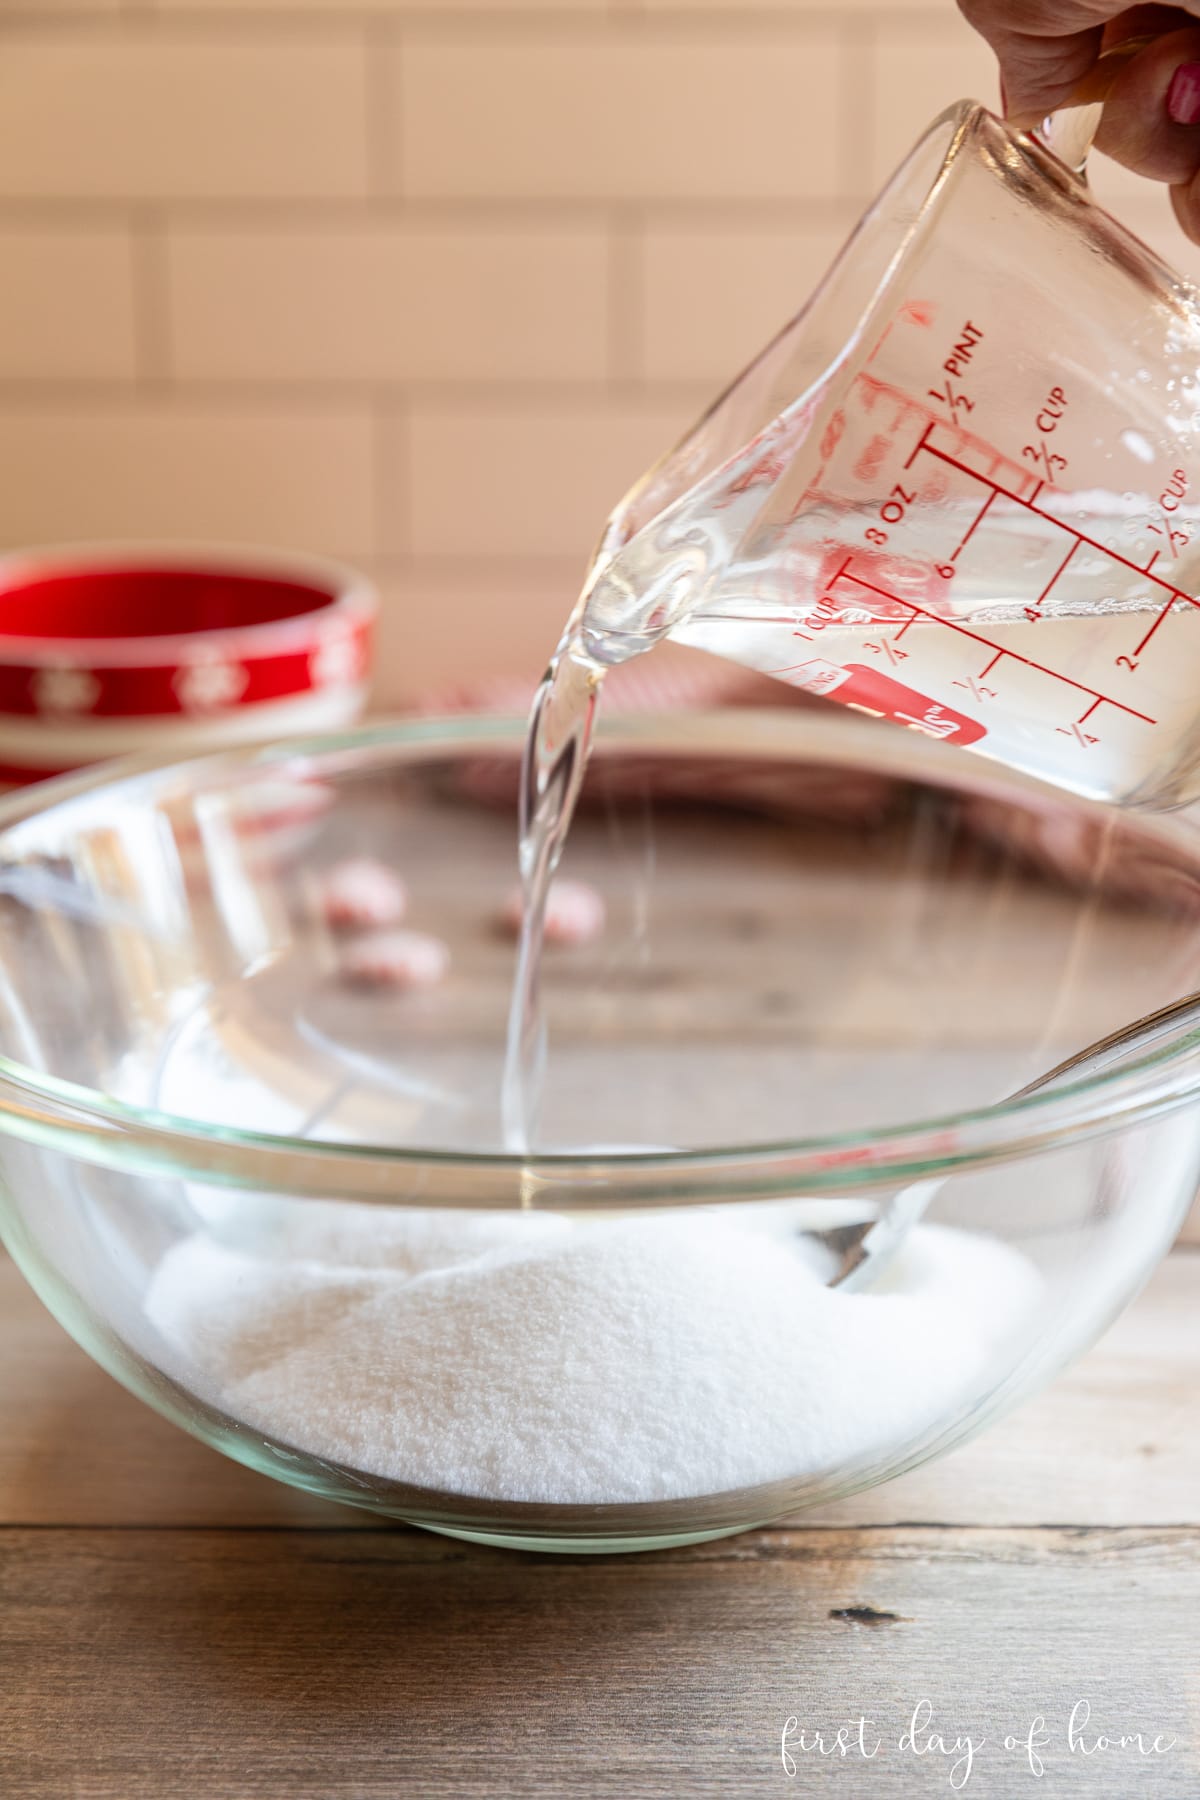 Blending coconut oil with sugar in a glass mixing bowl.